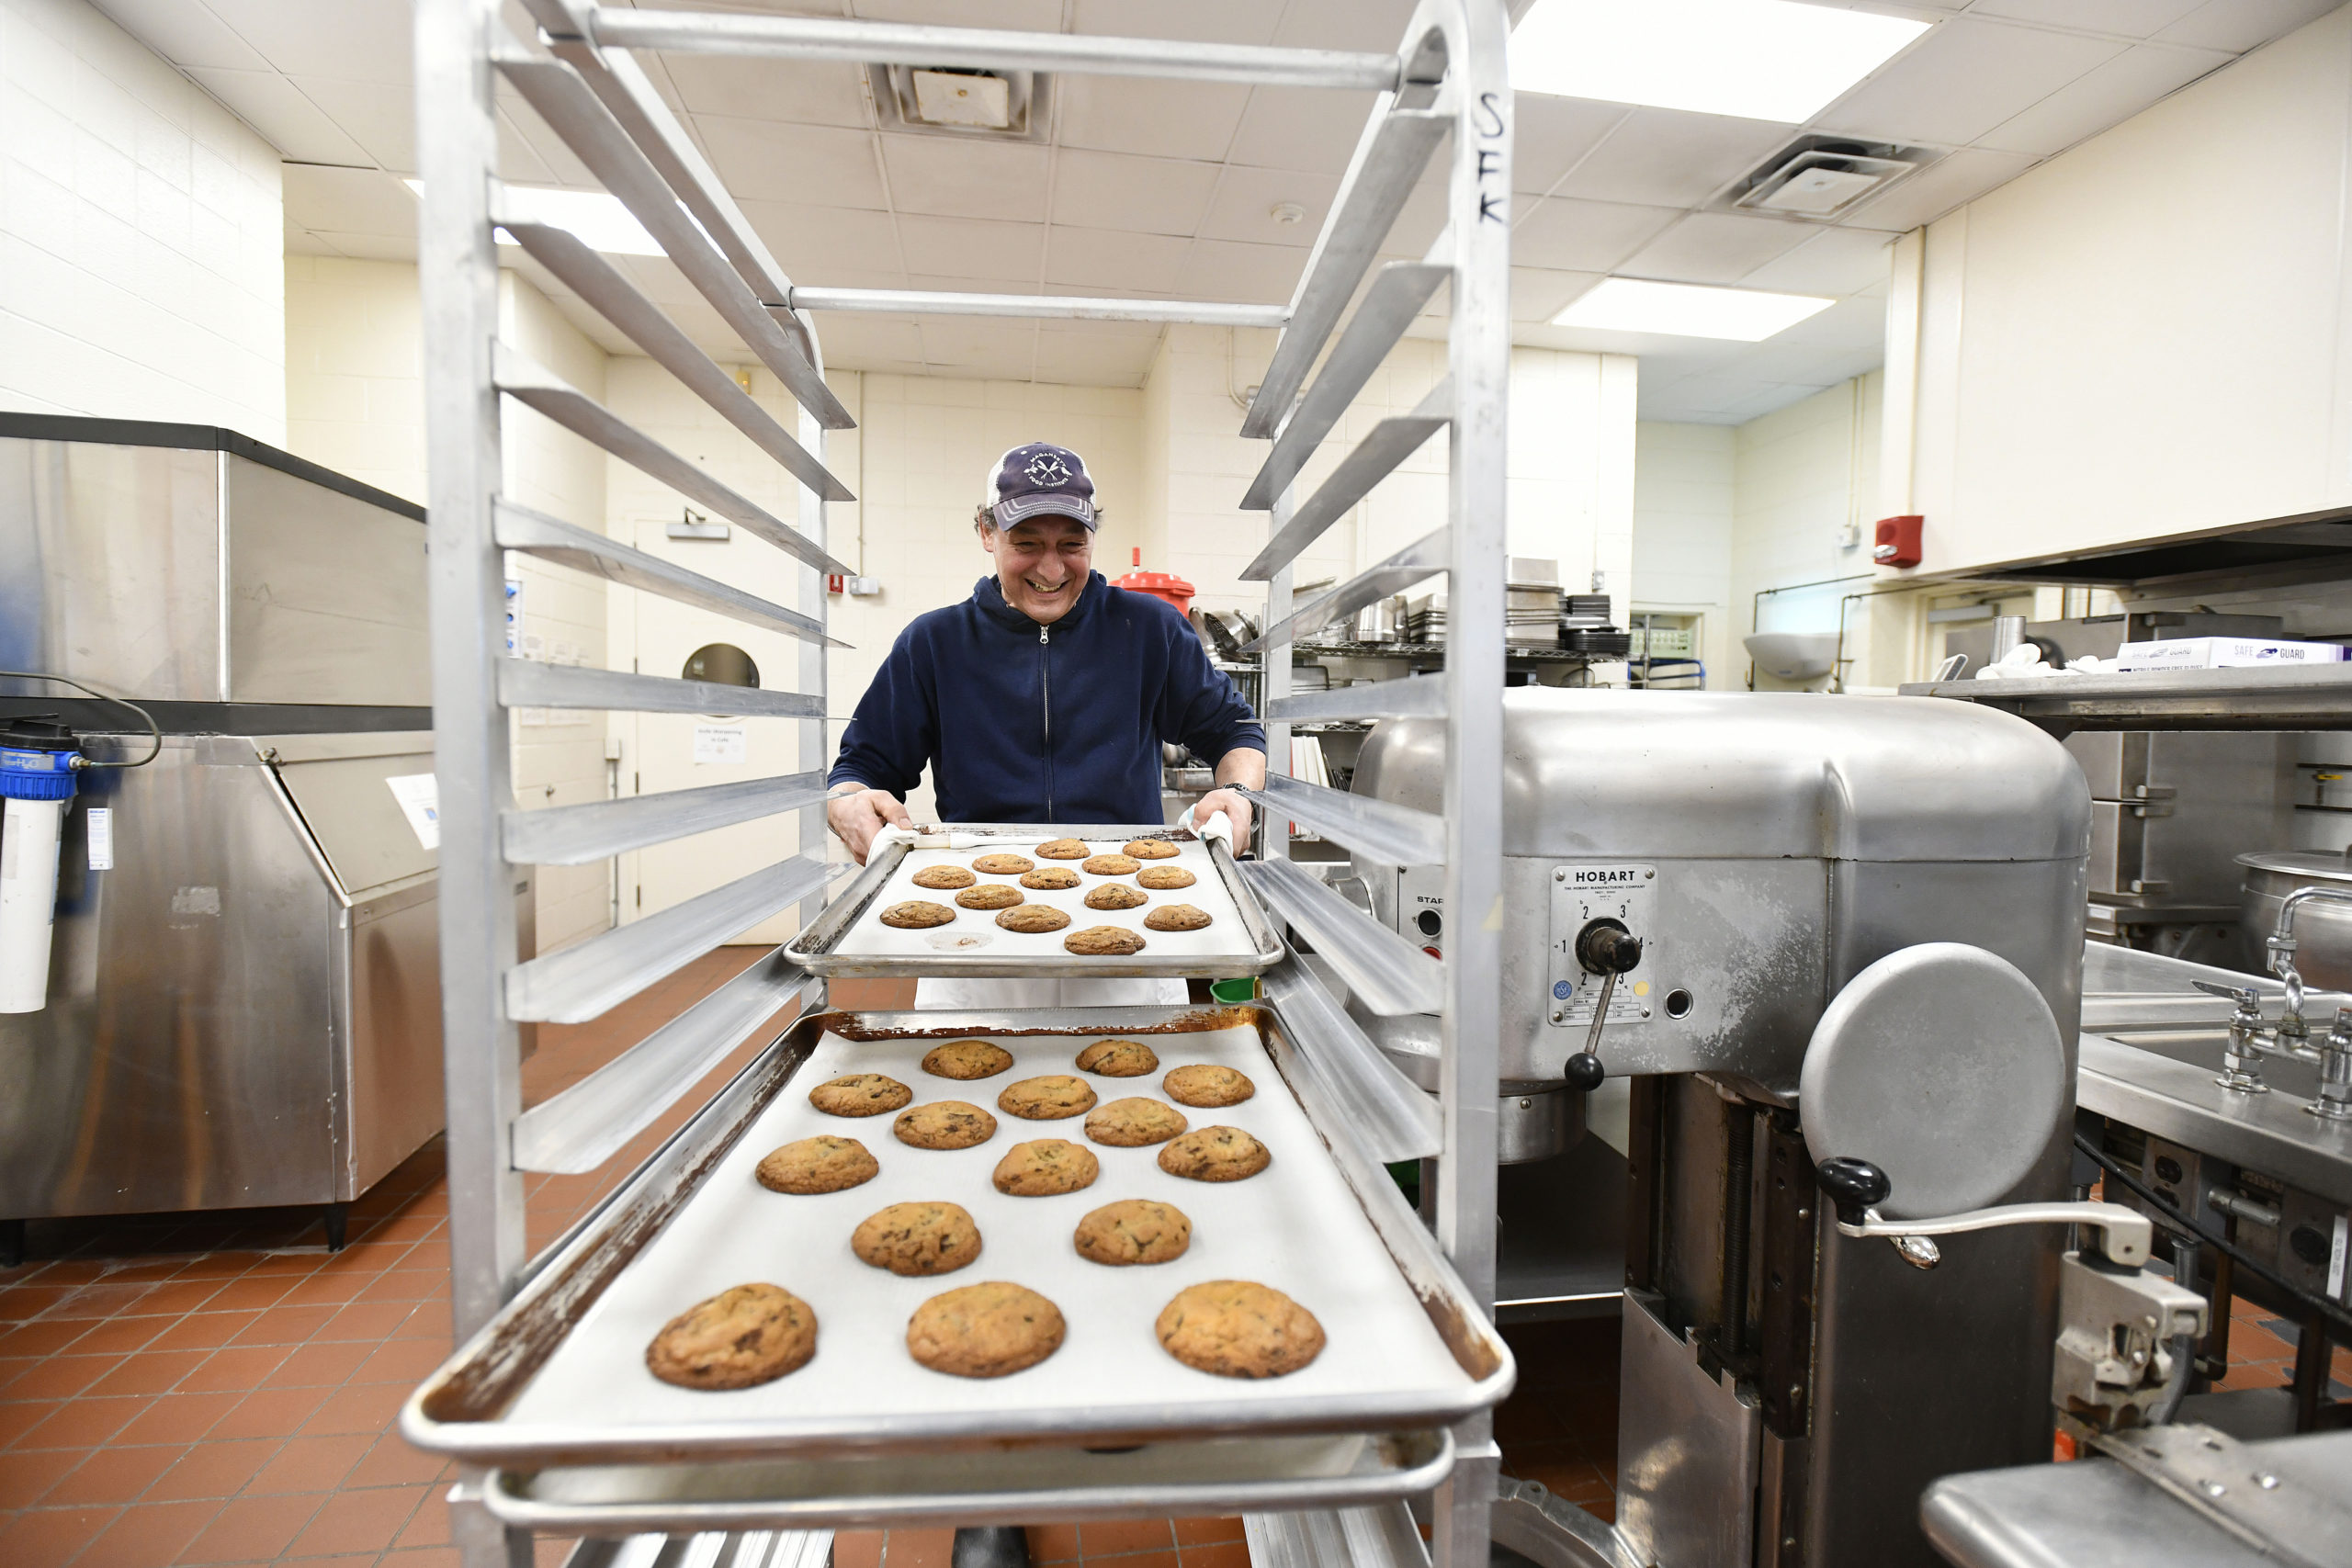 Robert Curreri of Robert's Bakestand in the kitchen at the East End Food hub.    DANA SHAW